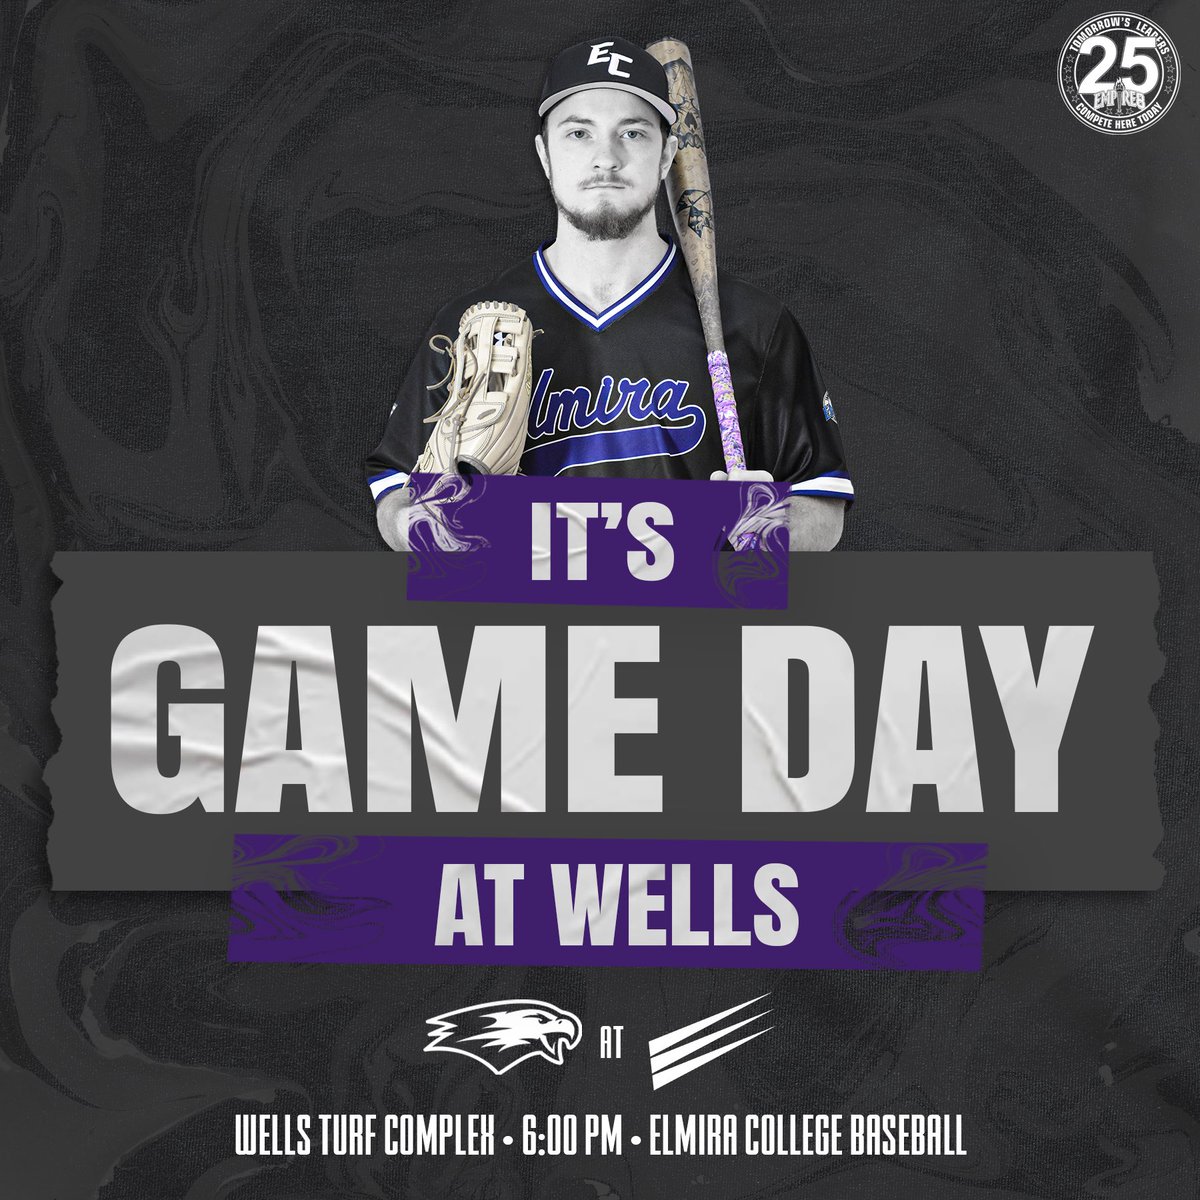 Elmira is on the road one final time this season as the Soaring Eagles face the Express under the lights! 🦅⚾️

🆚 Wells
🕕 6:00 PM 
📍 Aurora, NY | Wells Turf Complex
📺 & 📊: rb.gy/6g70xd

#TogetherWeFly #FightOn4EC #ElmiraProud